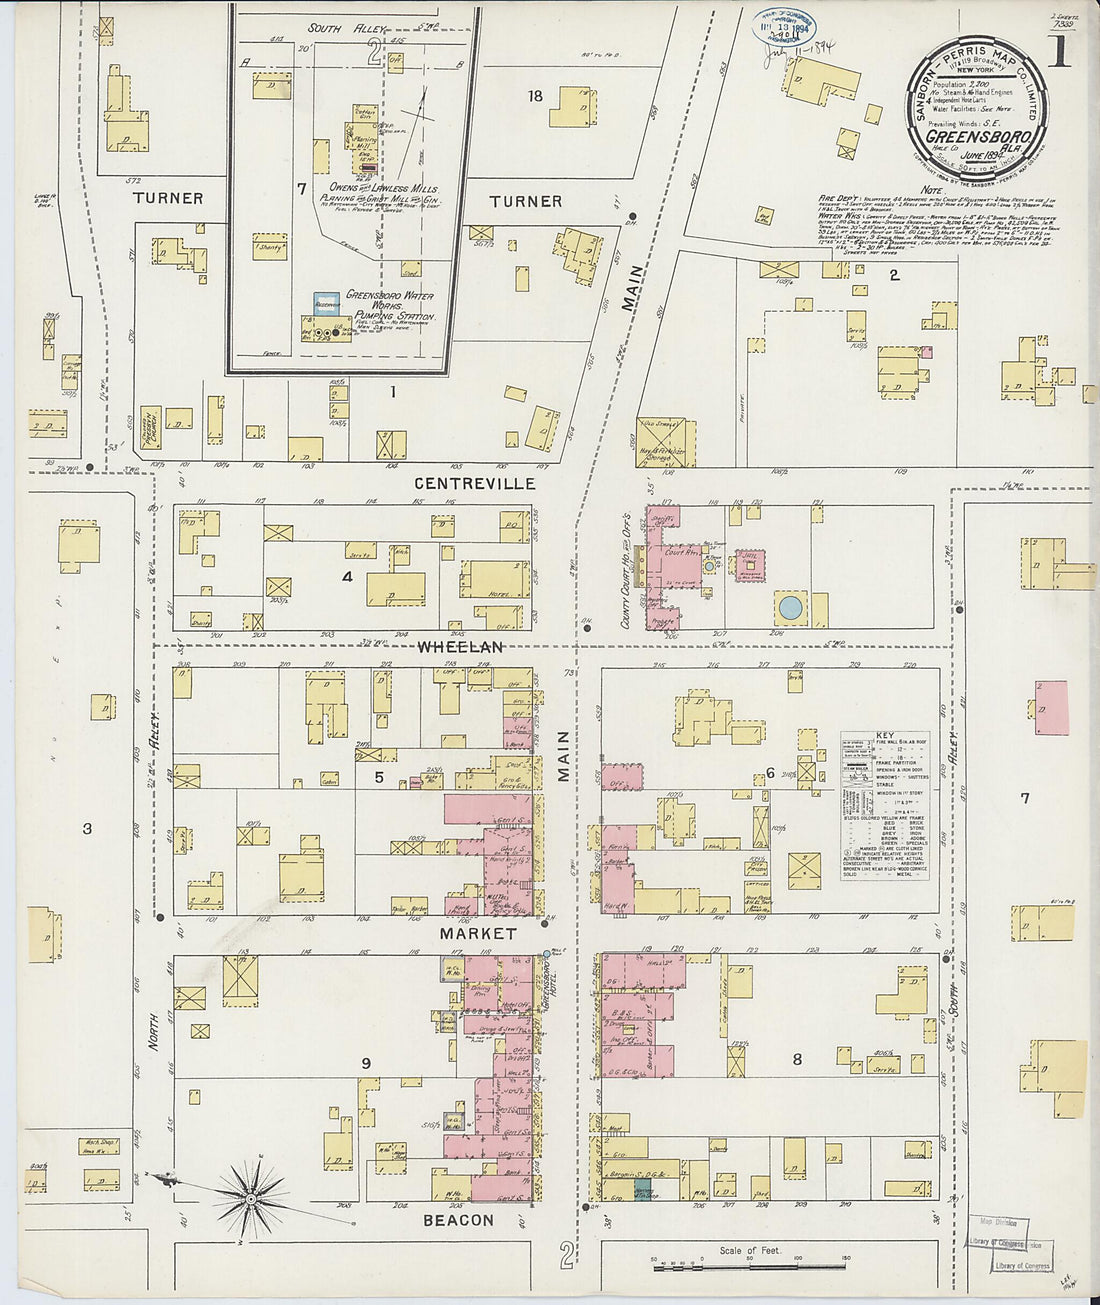 This old map of Greensboro, Hale County, Alabama was created by Sanborn Map Company in 1894